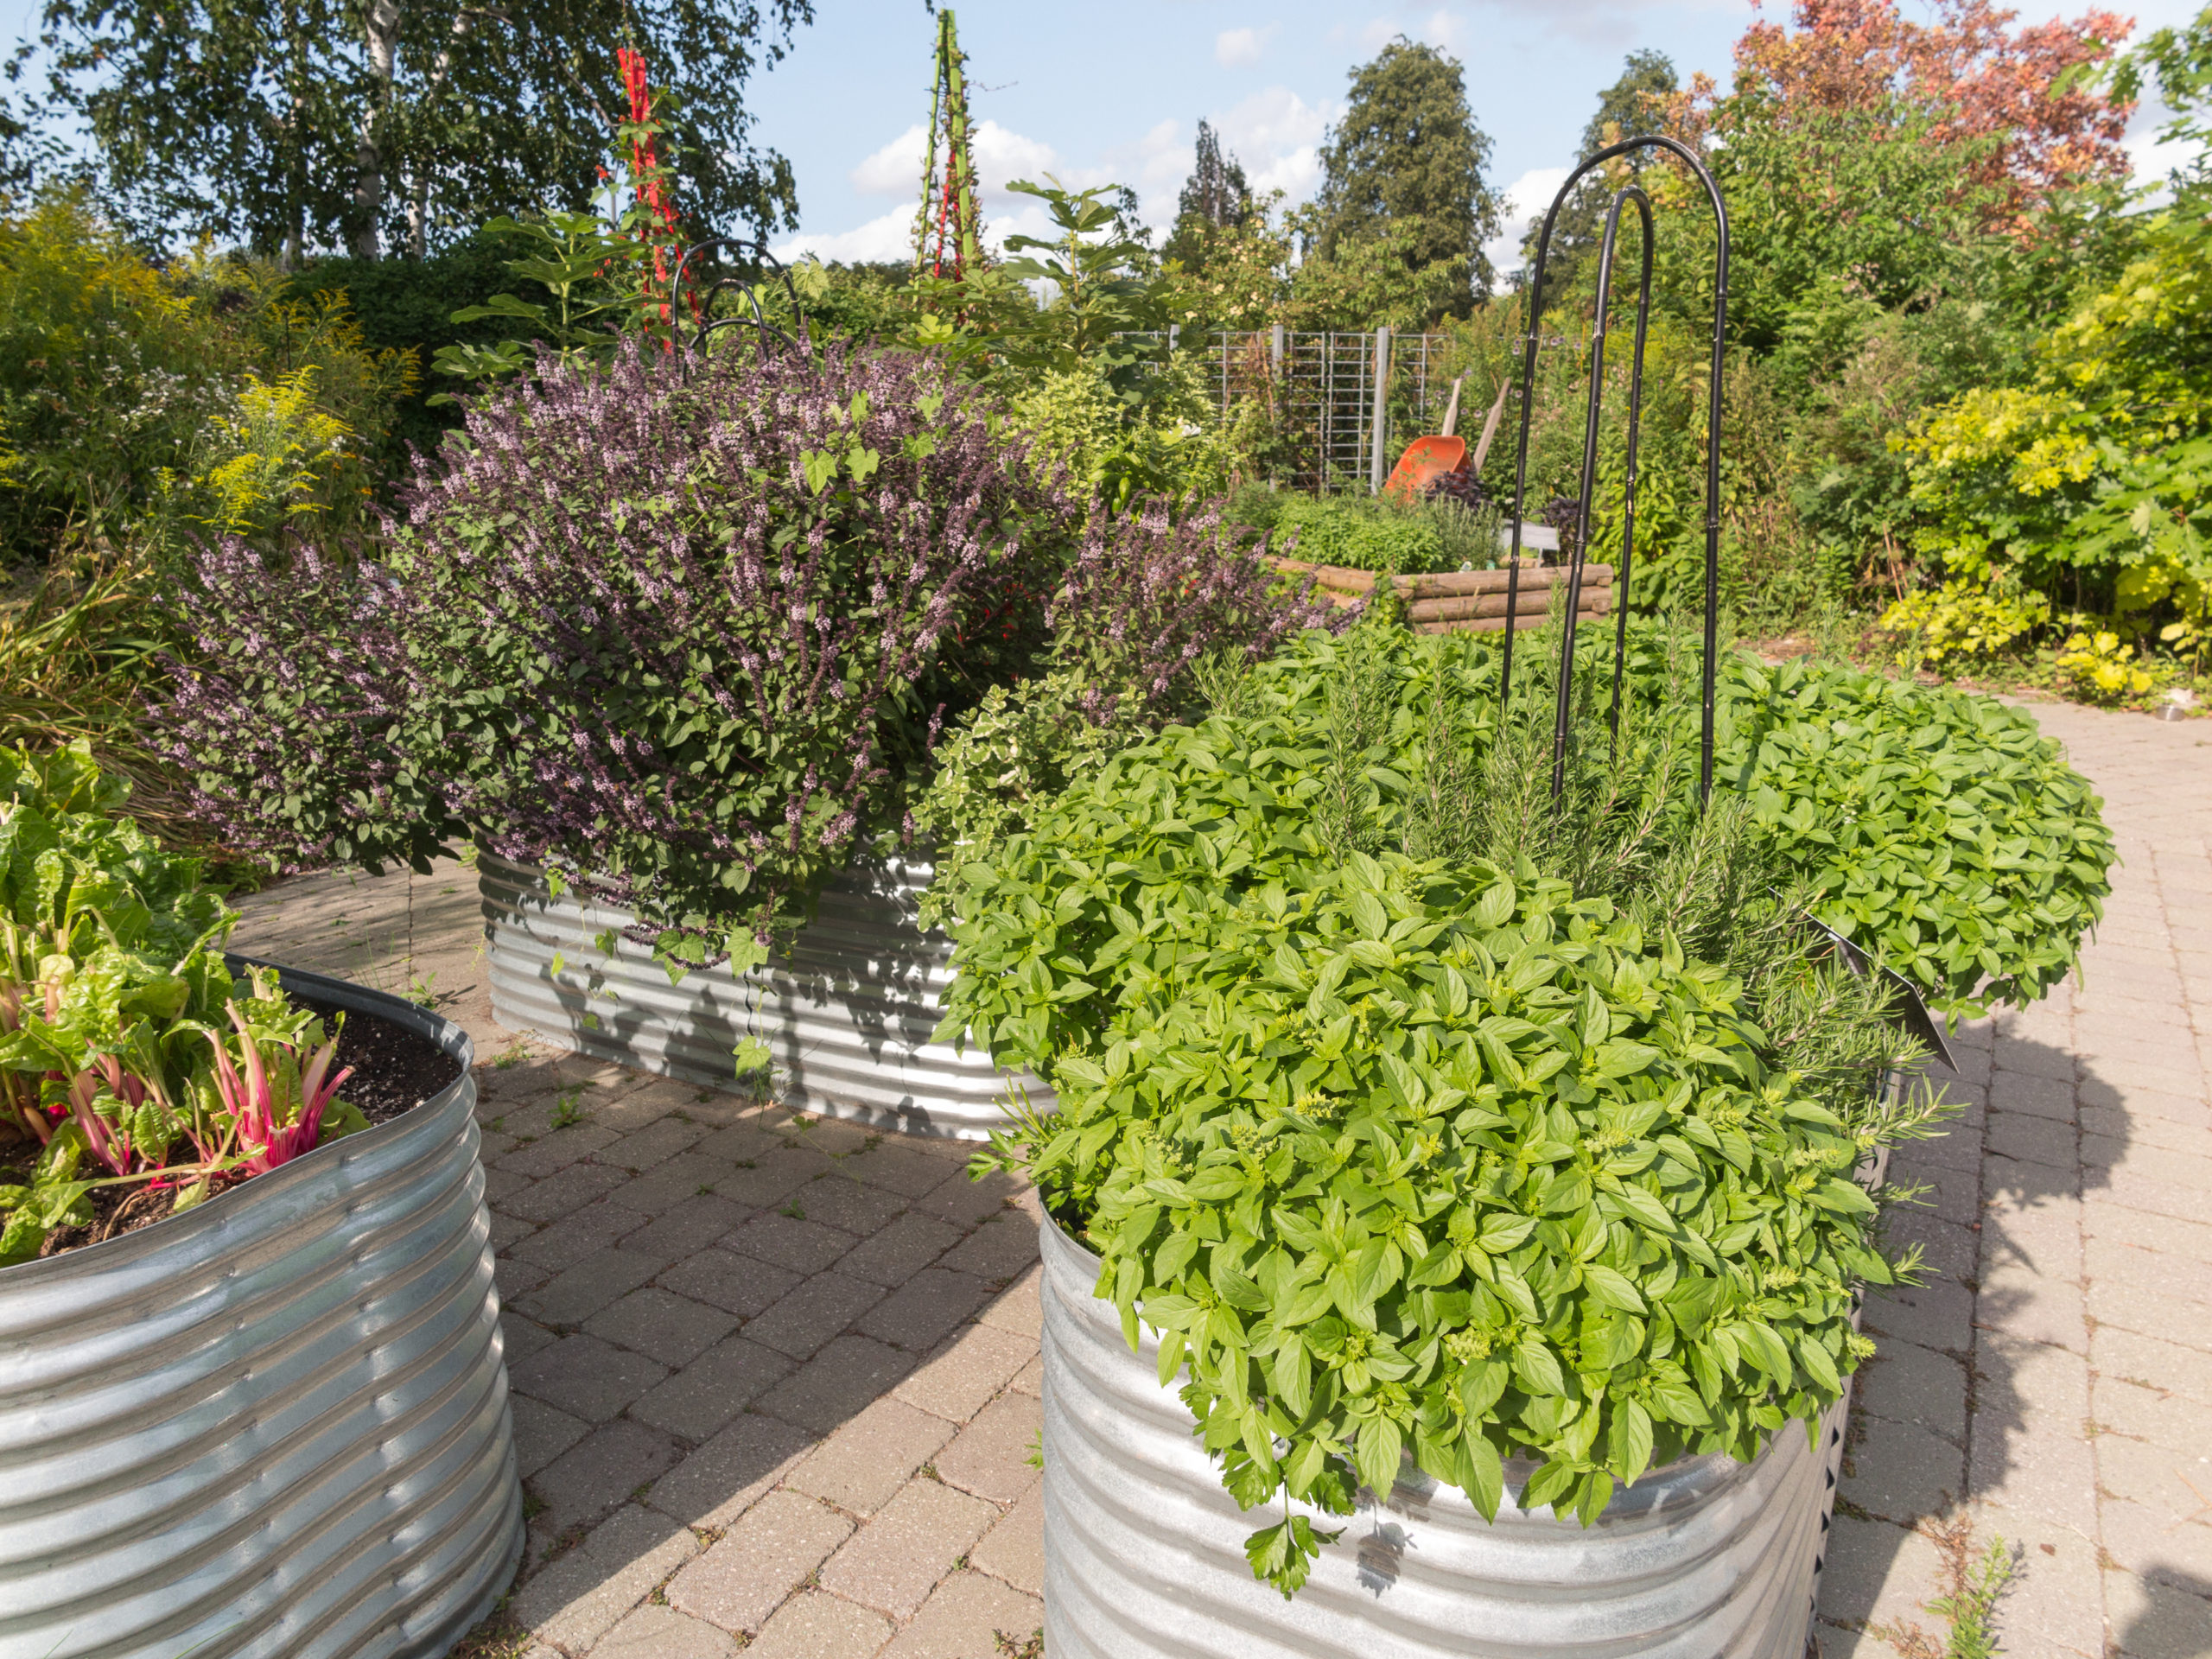 Metal Planters with herbs in urban park